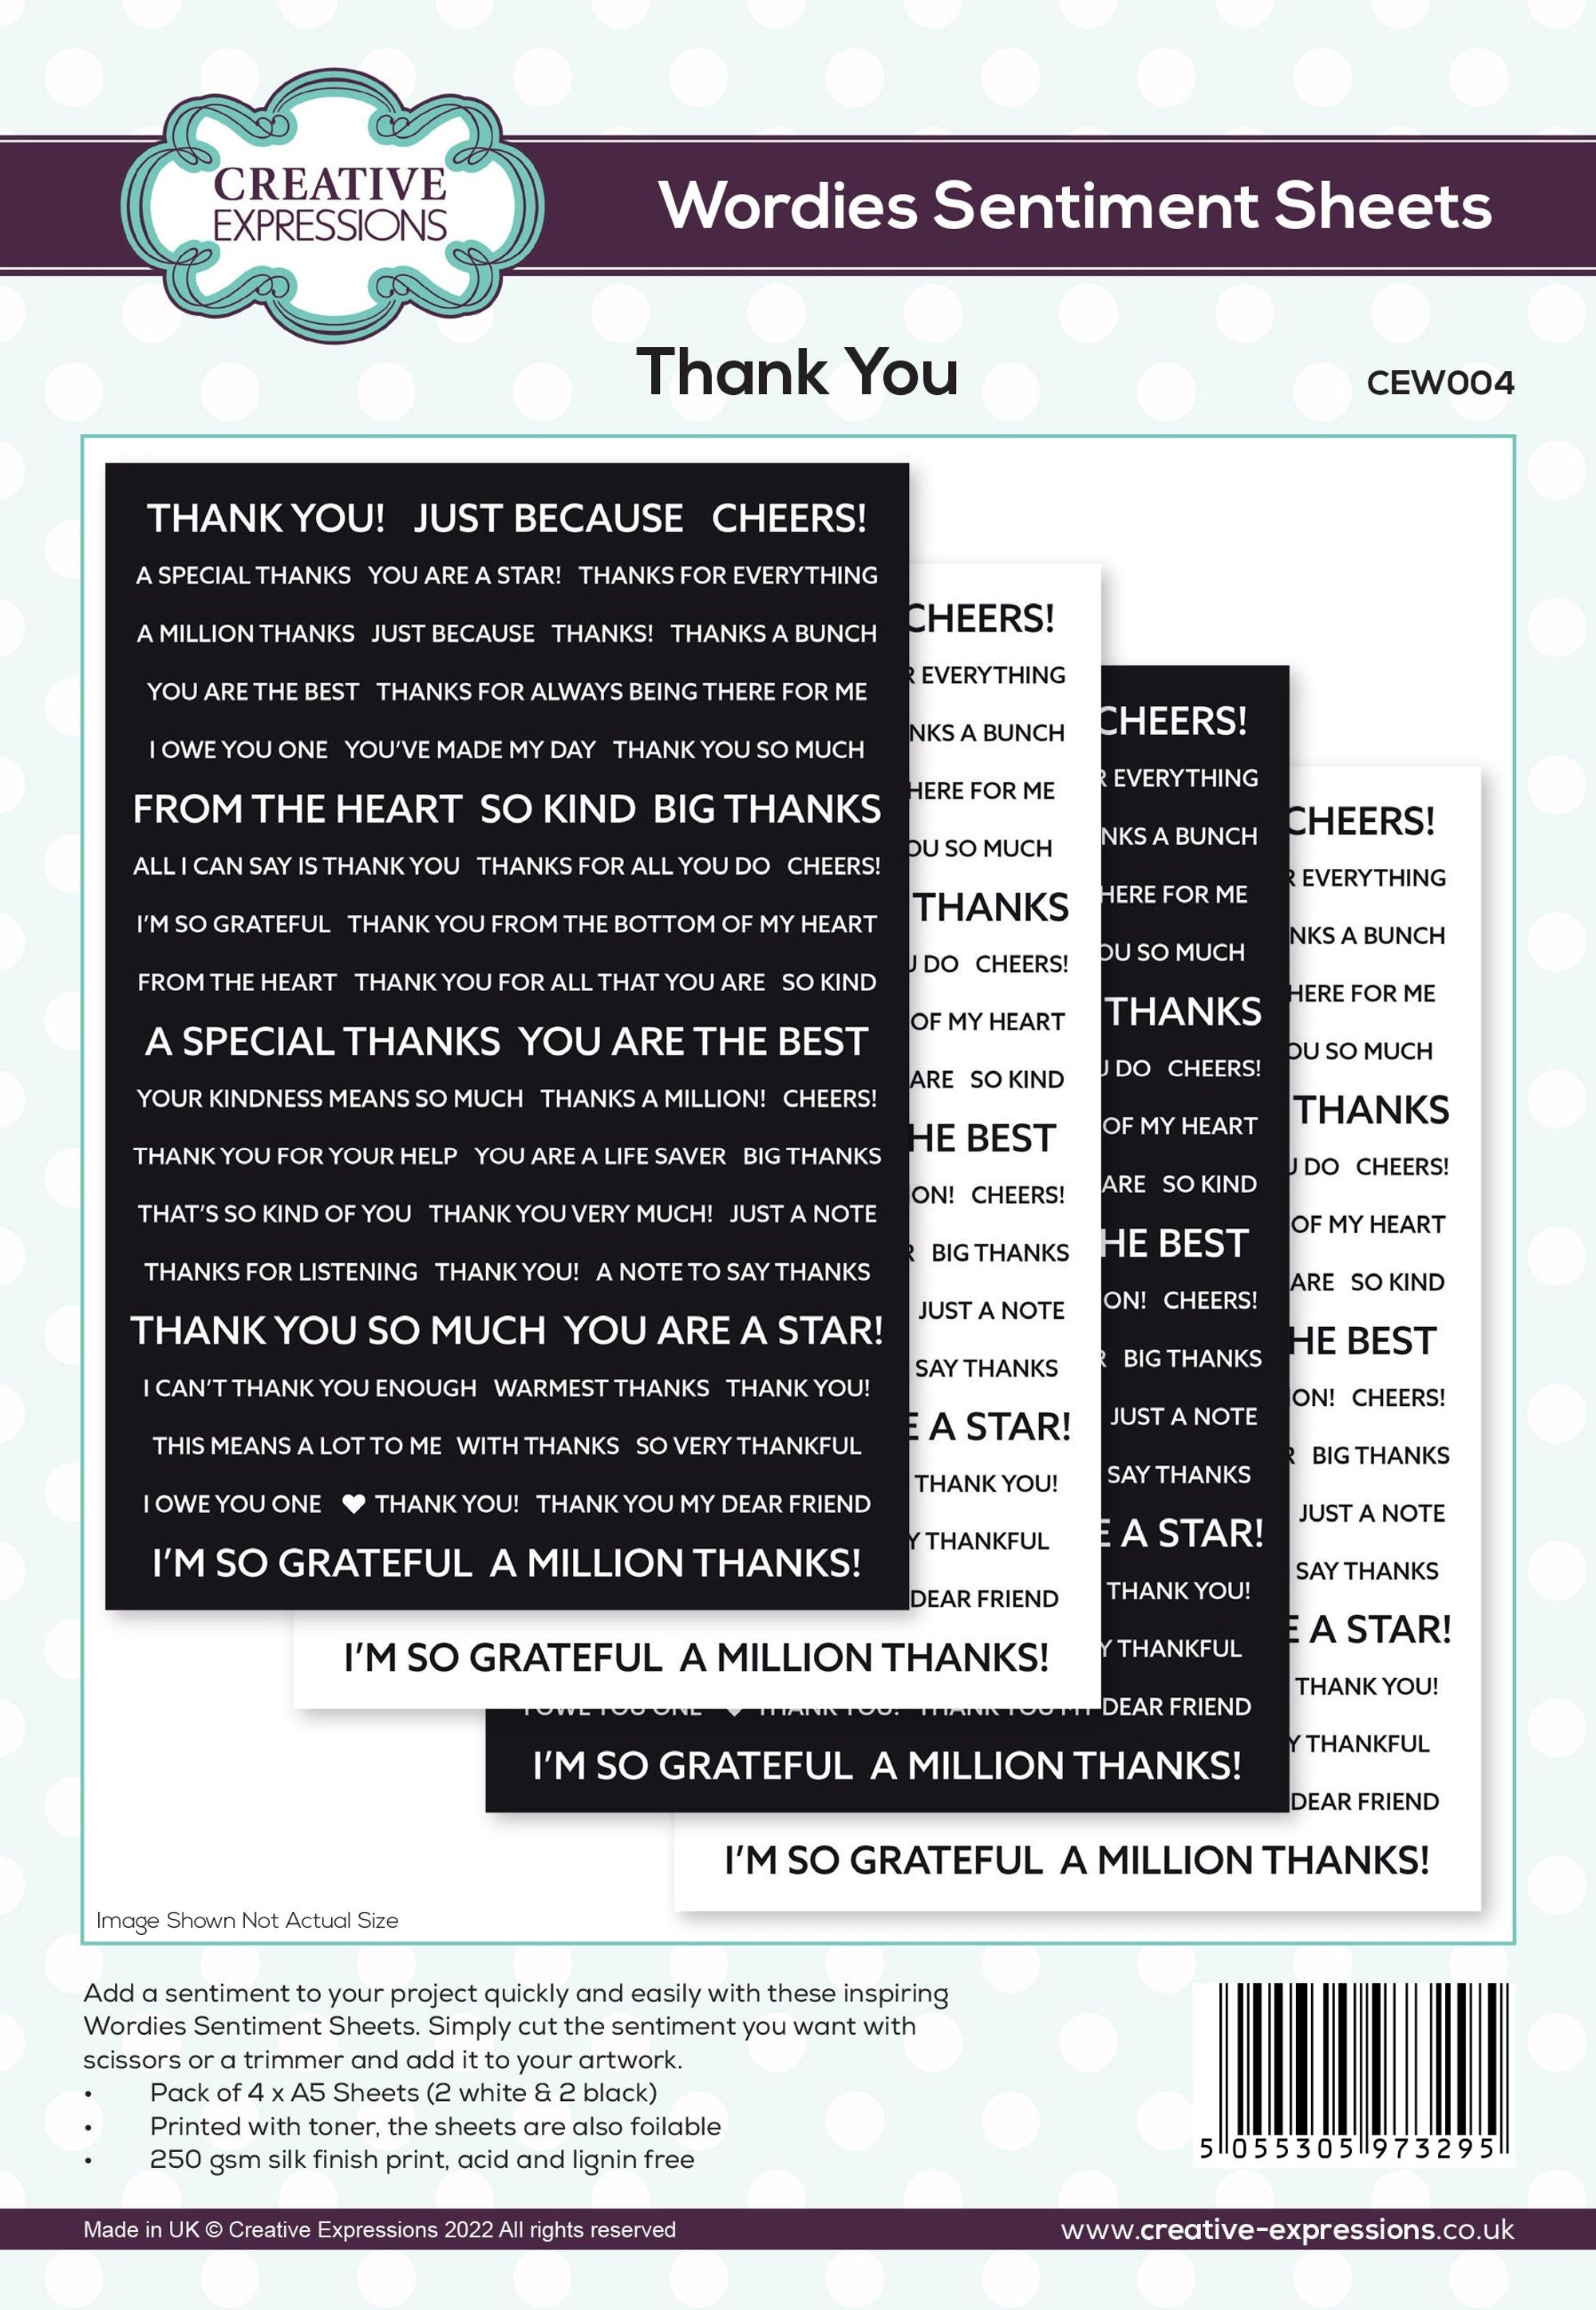 Creative Expressions Wordies Thank You Sentiment Sheets Pk 4 A5